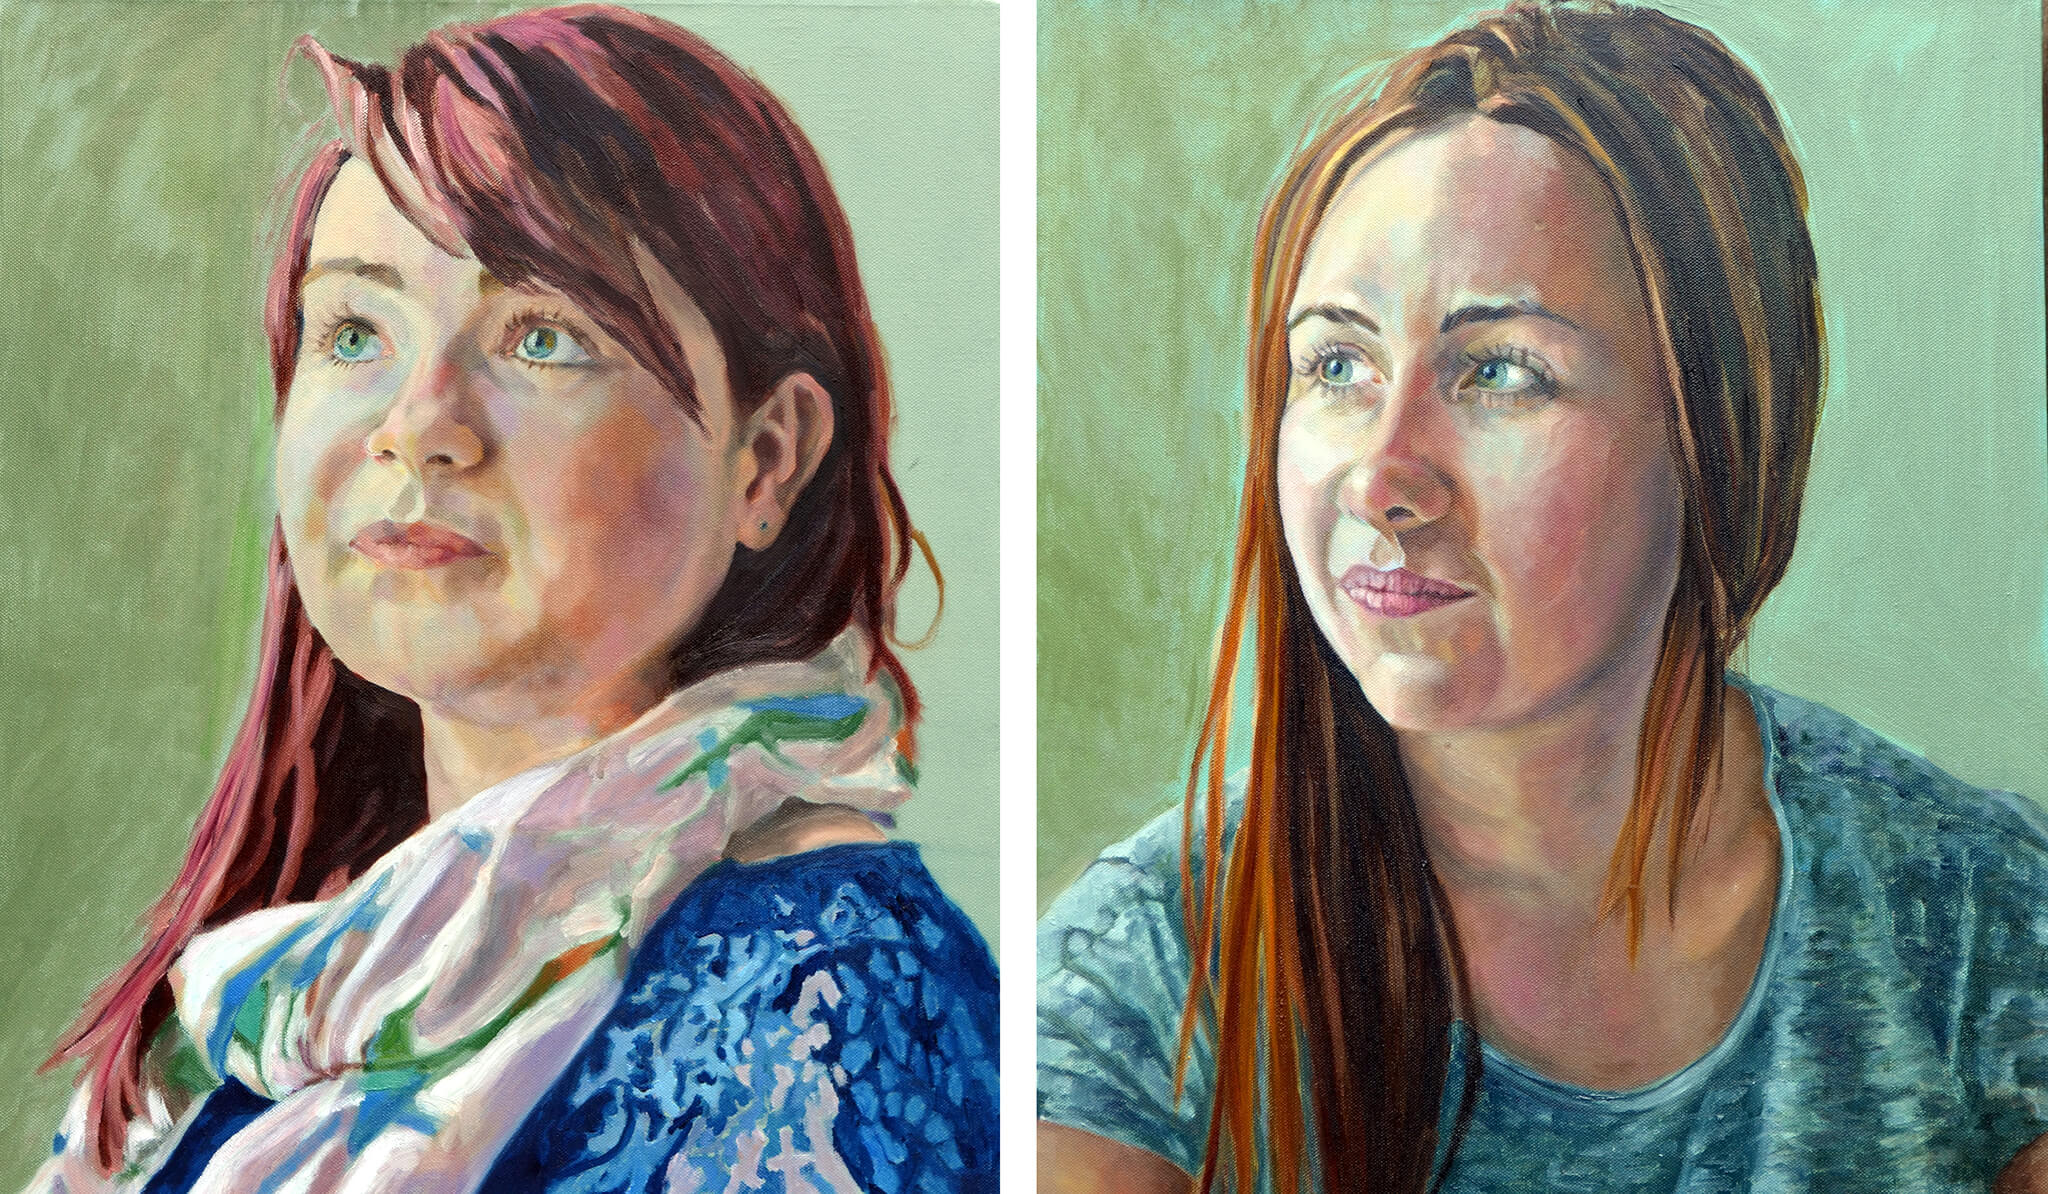 Florence and Phoebe Gibson portraits in oils on canvas artworks by Stella Tooth.